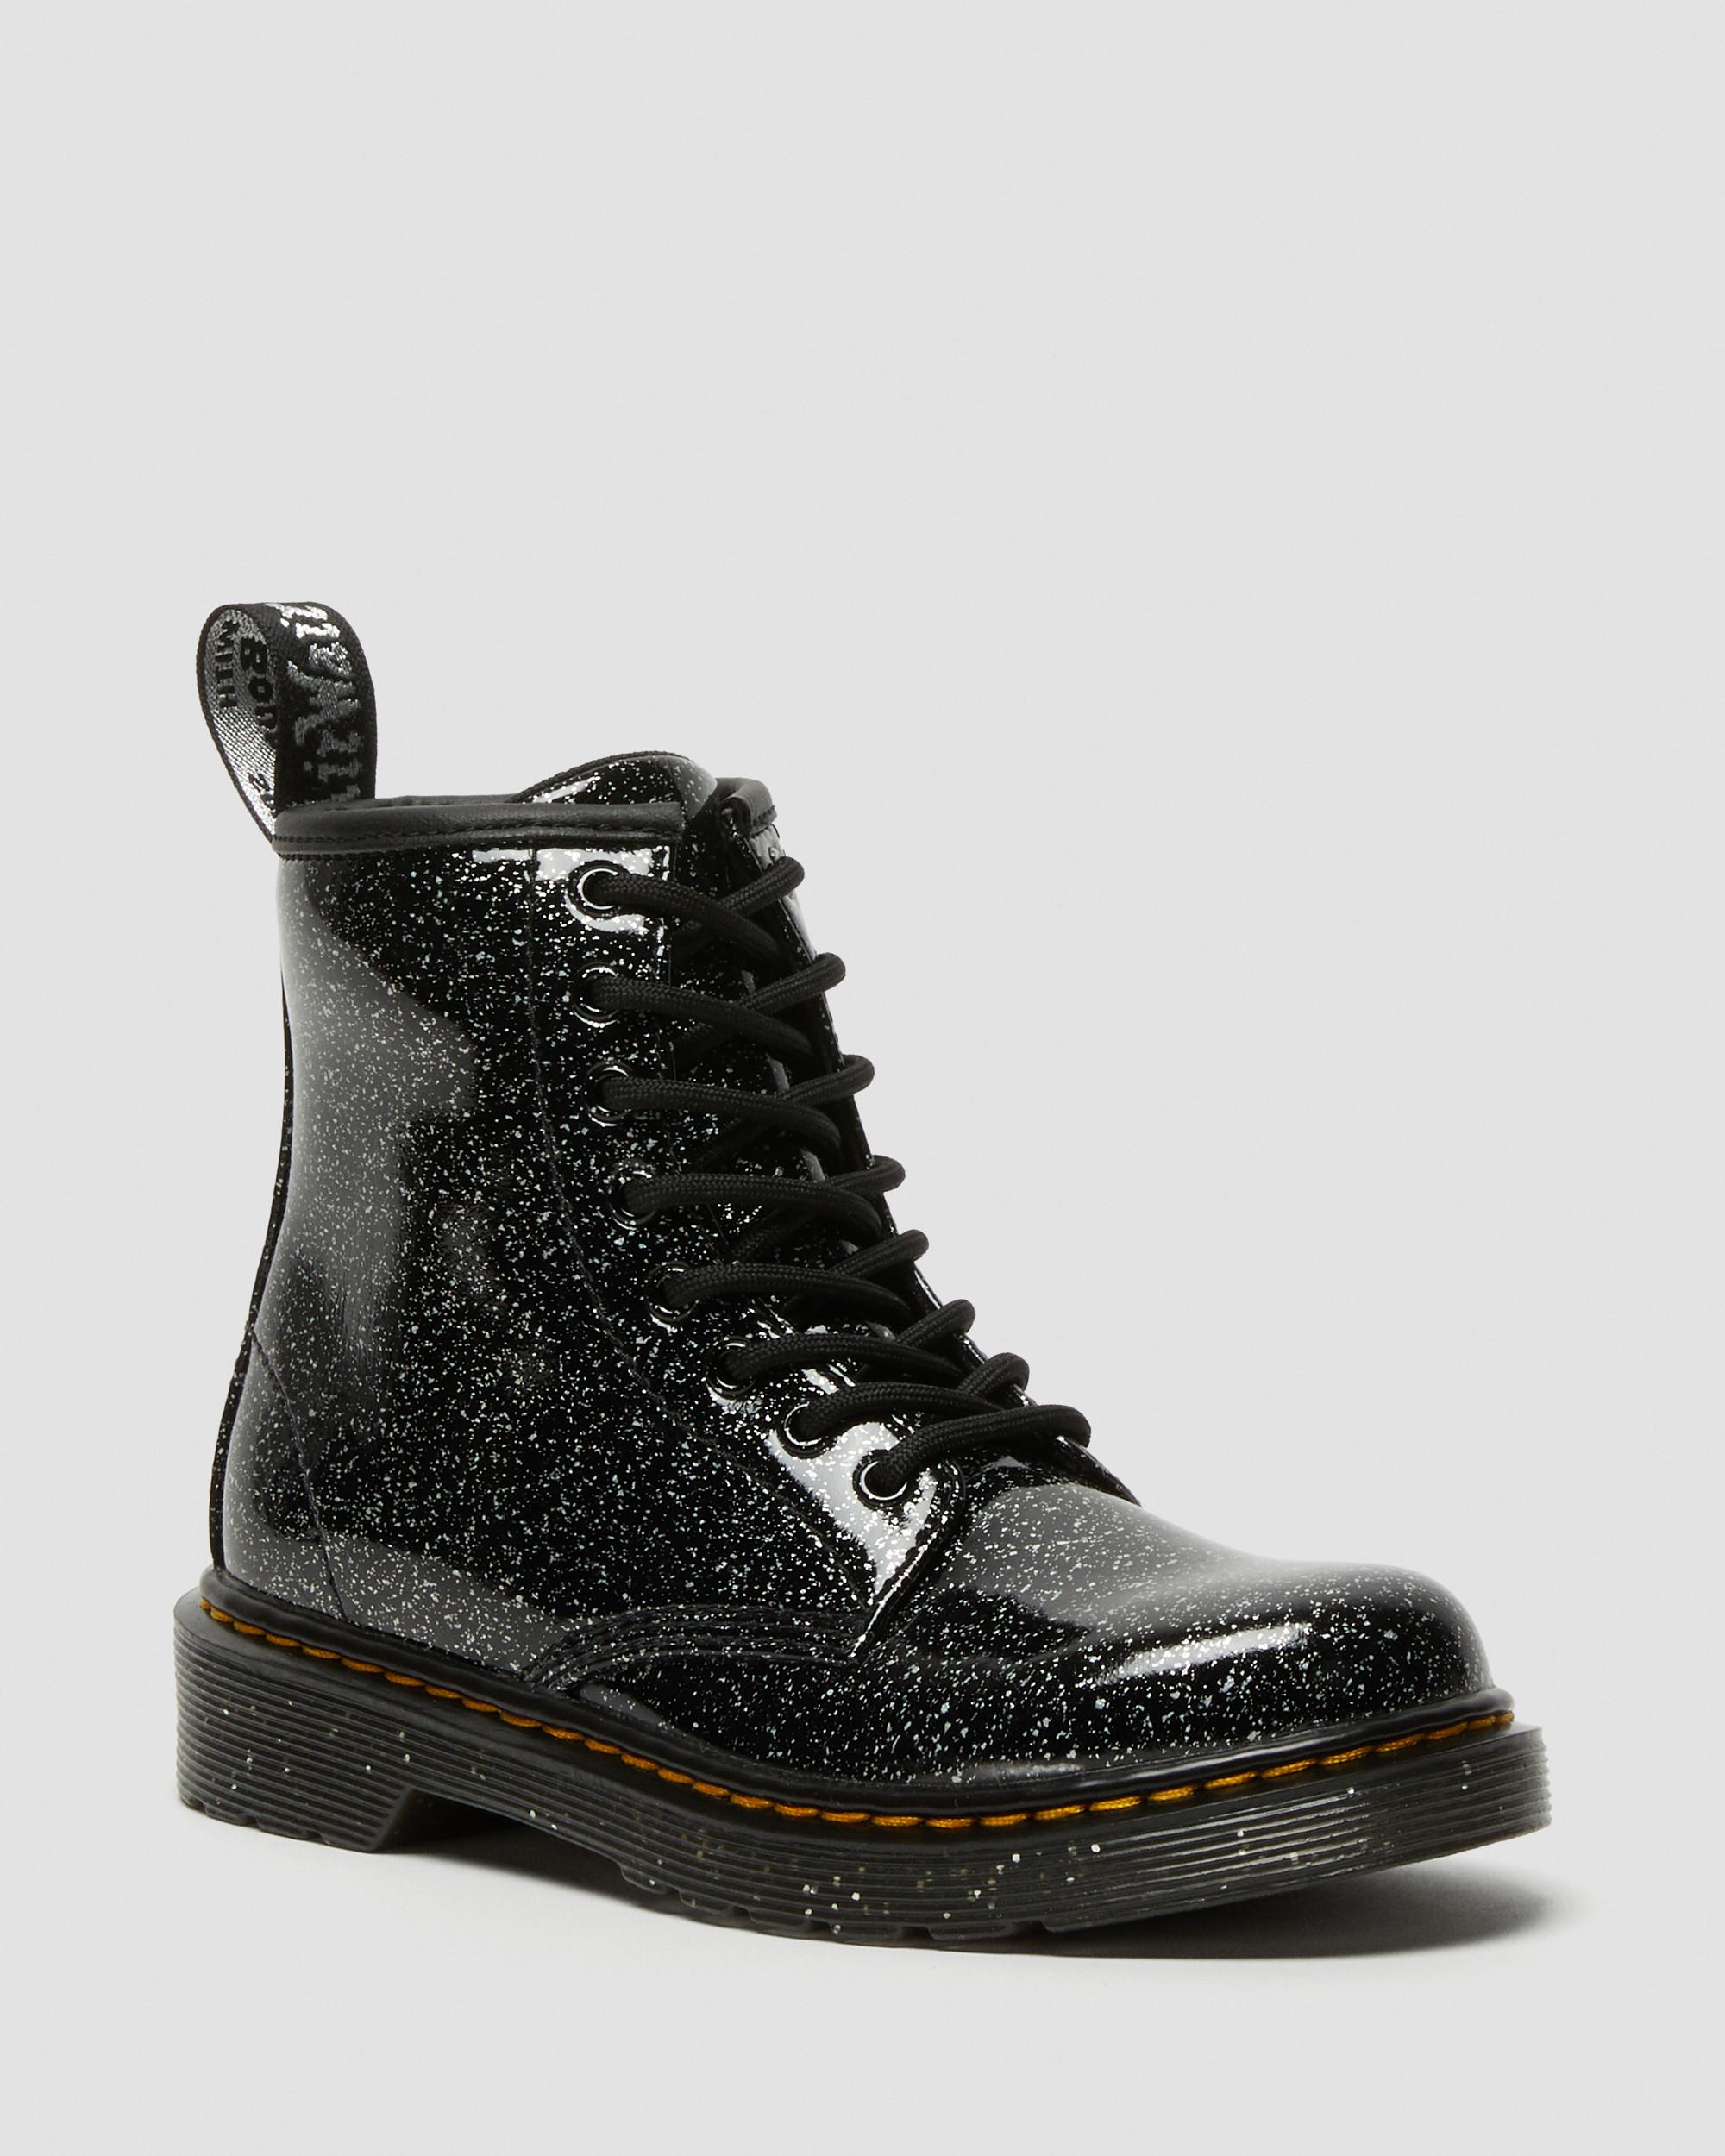 Junior 1460 Softy T Black Boots Dr. Martens Up Lace in | Leather